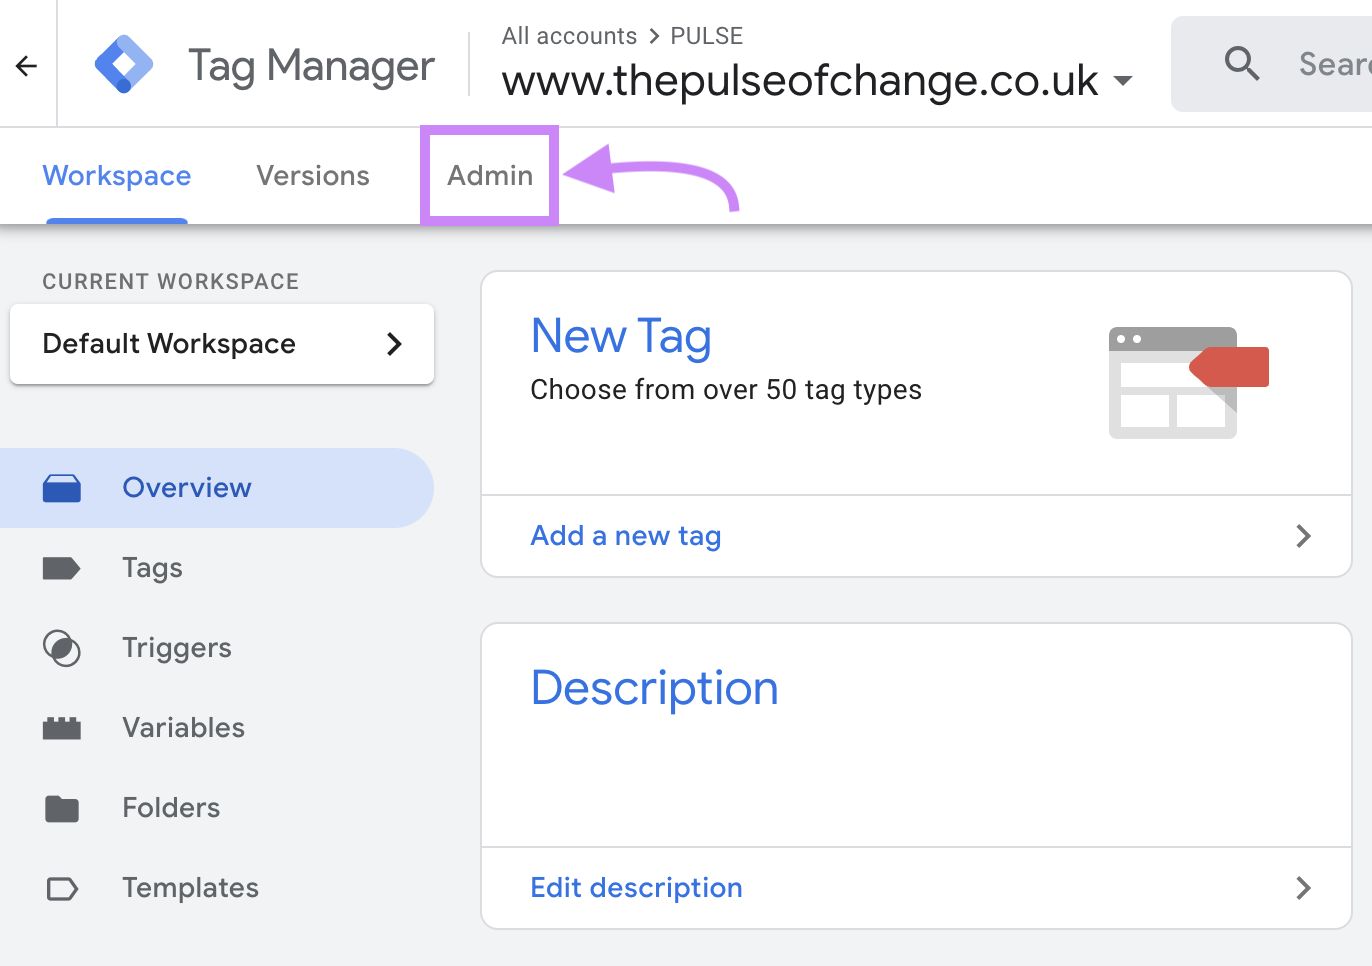 "Admin" selected from Google Tag Manager homepage